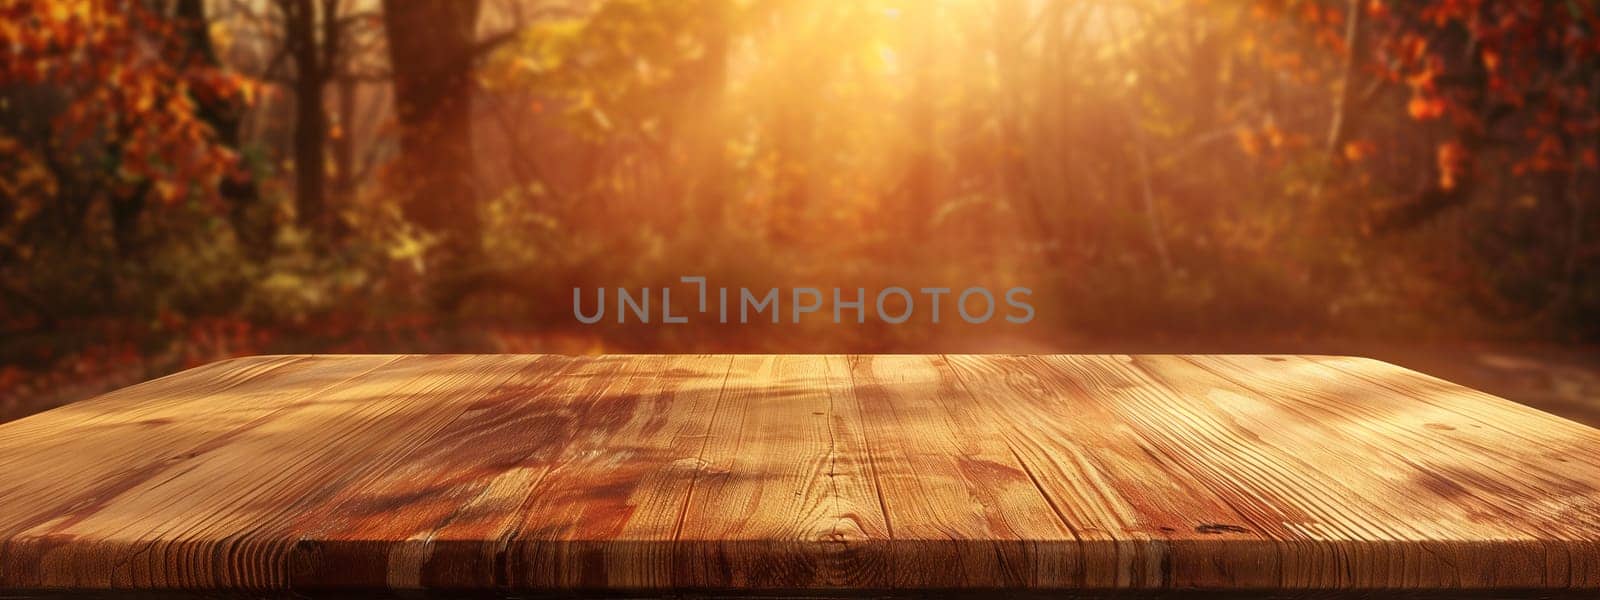 Amber hues on hardwood table in forest clearing, sun filtering through trees by richwolf